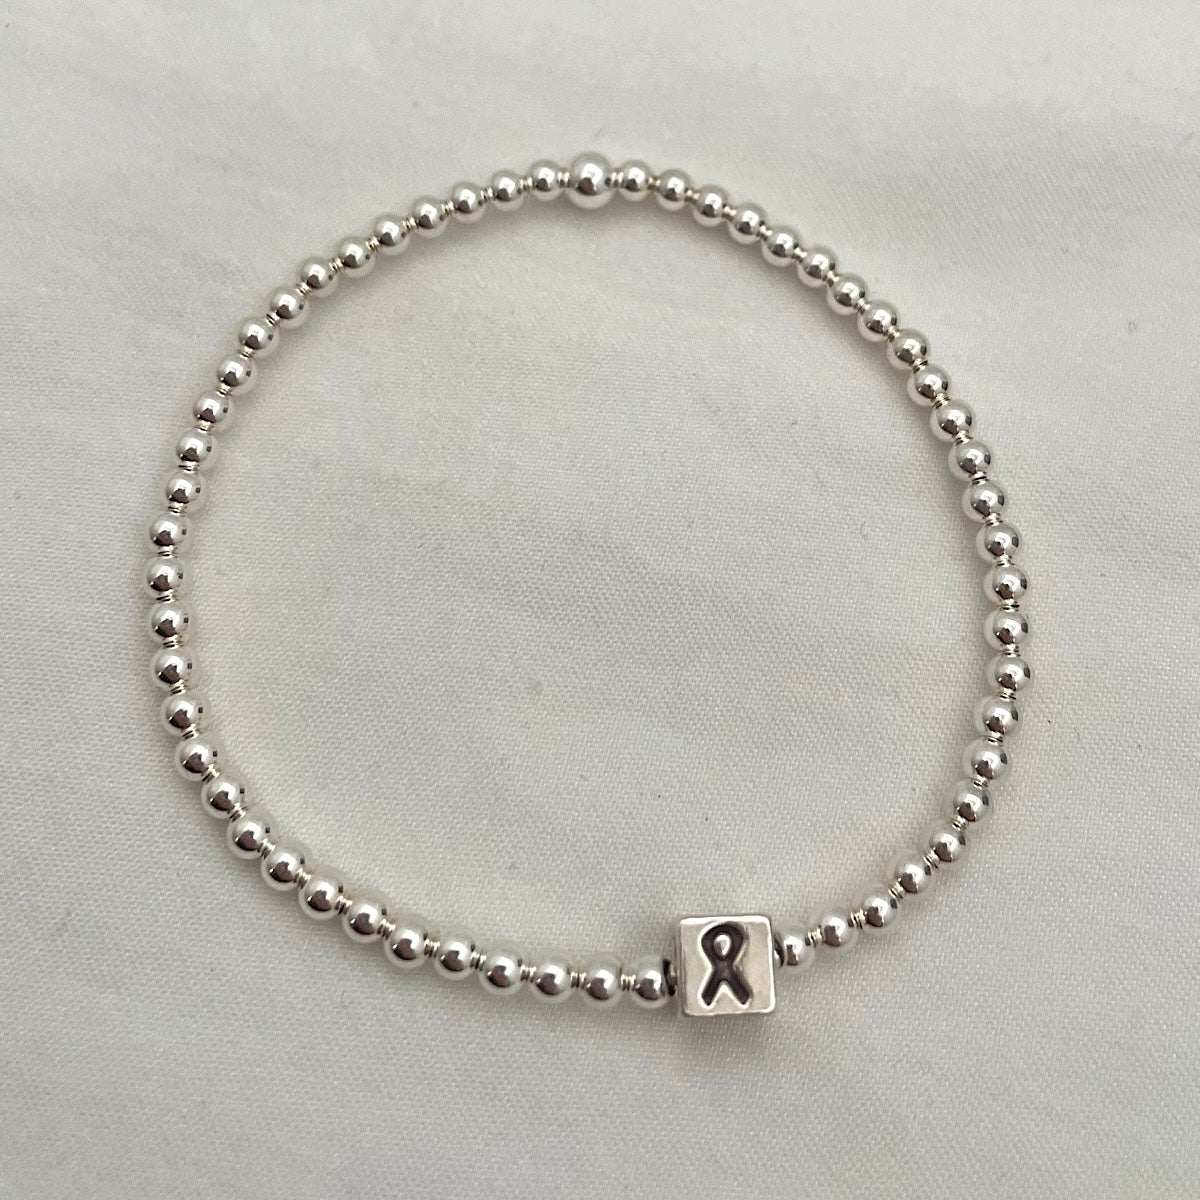 Breast Cancer Ribbon Free Floating Charm Bead Bracelet Sterling Silver